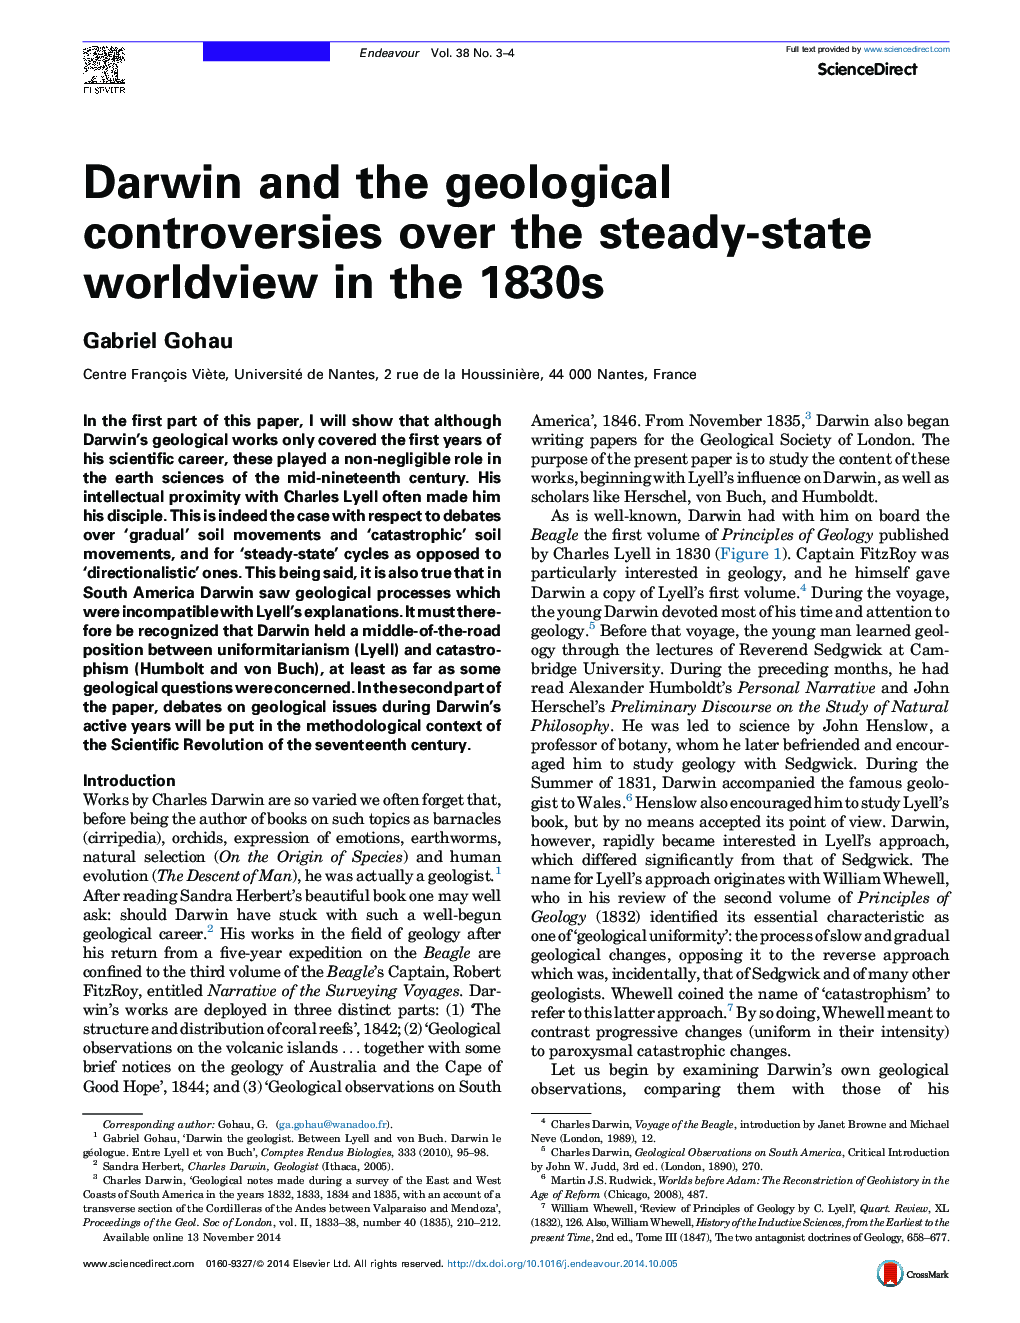 Darwin and the geological controversies over the steady-state worldview in the 1830s